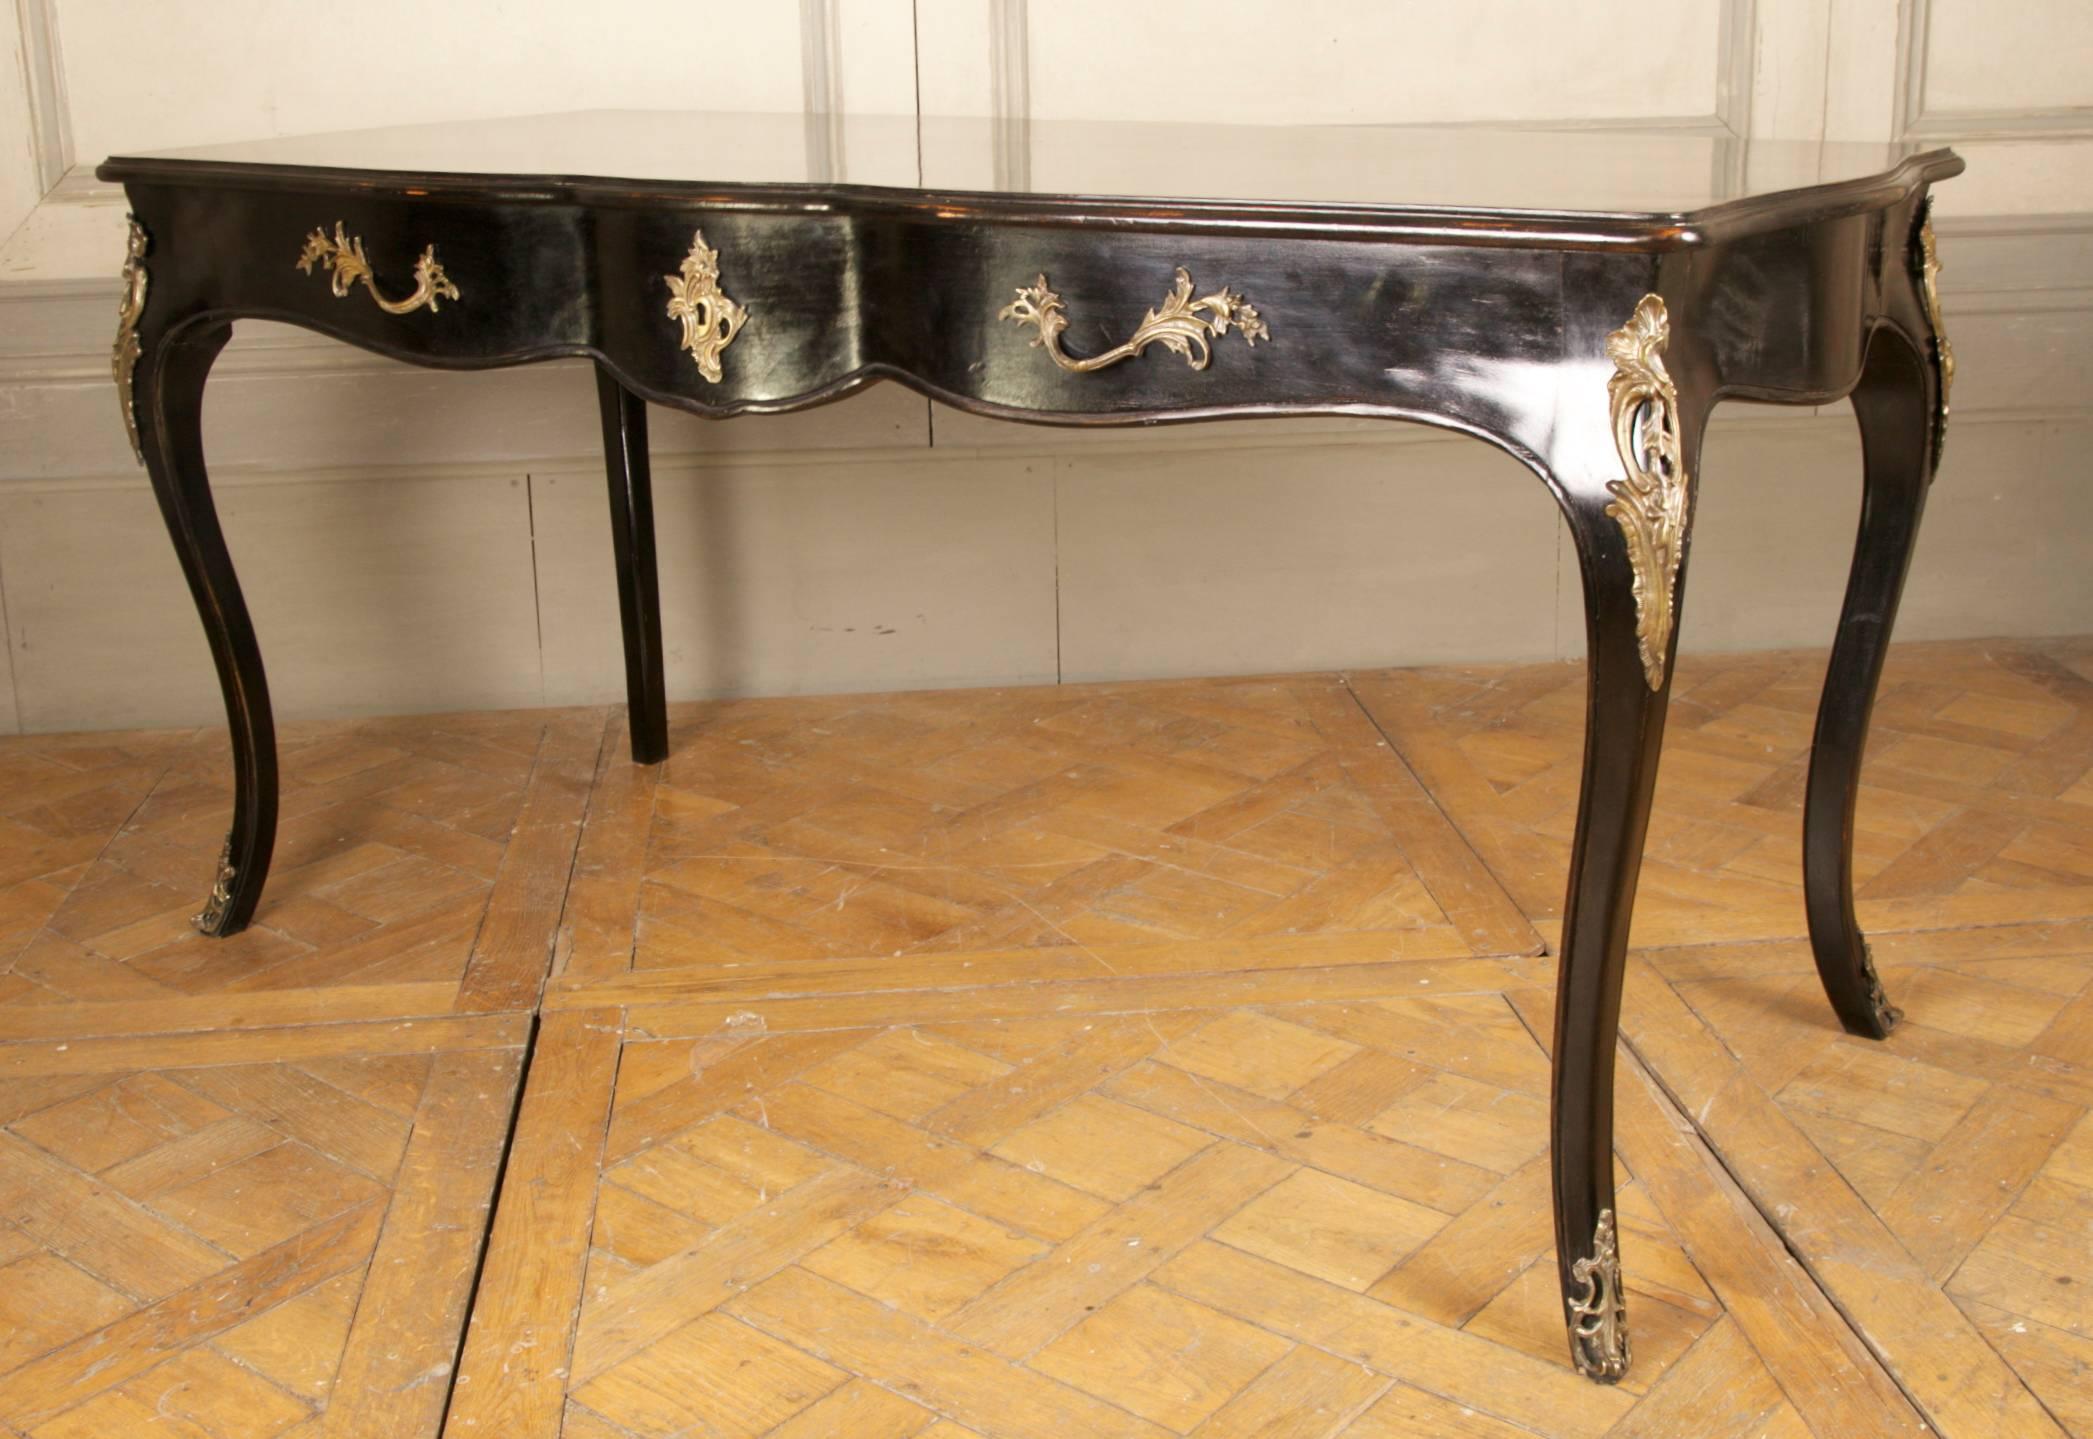 Louis XV style bureau plat, freestanding design with brass ormolu on both sides and three drawers. This design is also used as a vanity table. Hand-carved in solid beech and hand finished in a black lacquer patina. This piece can also be ordered to